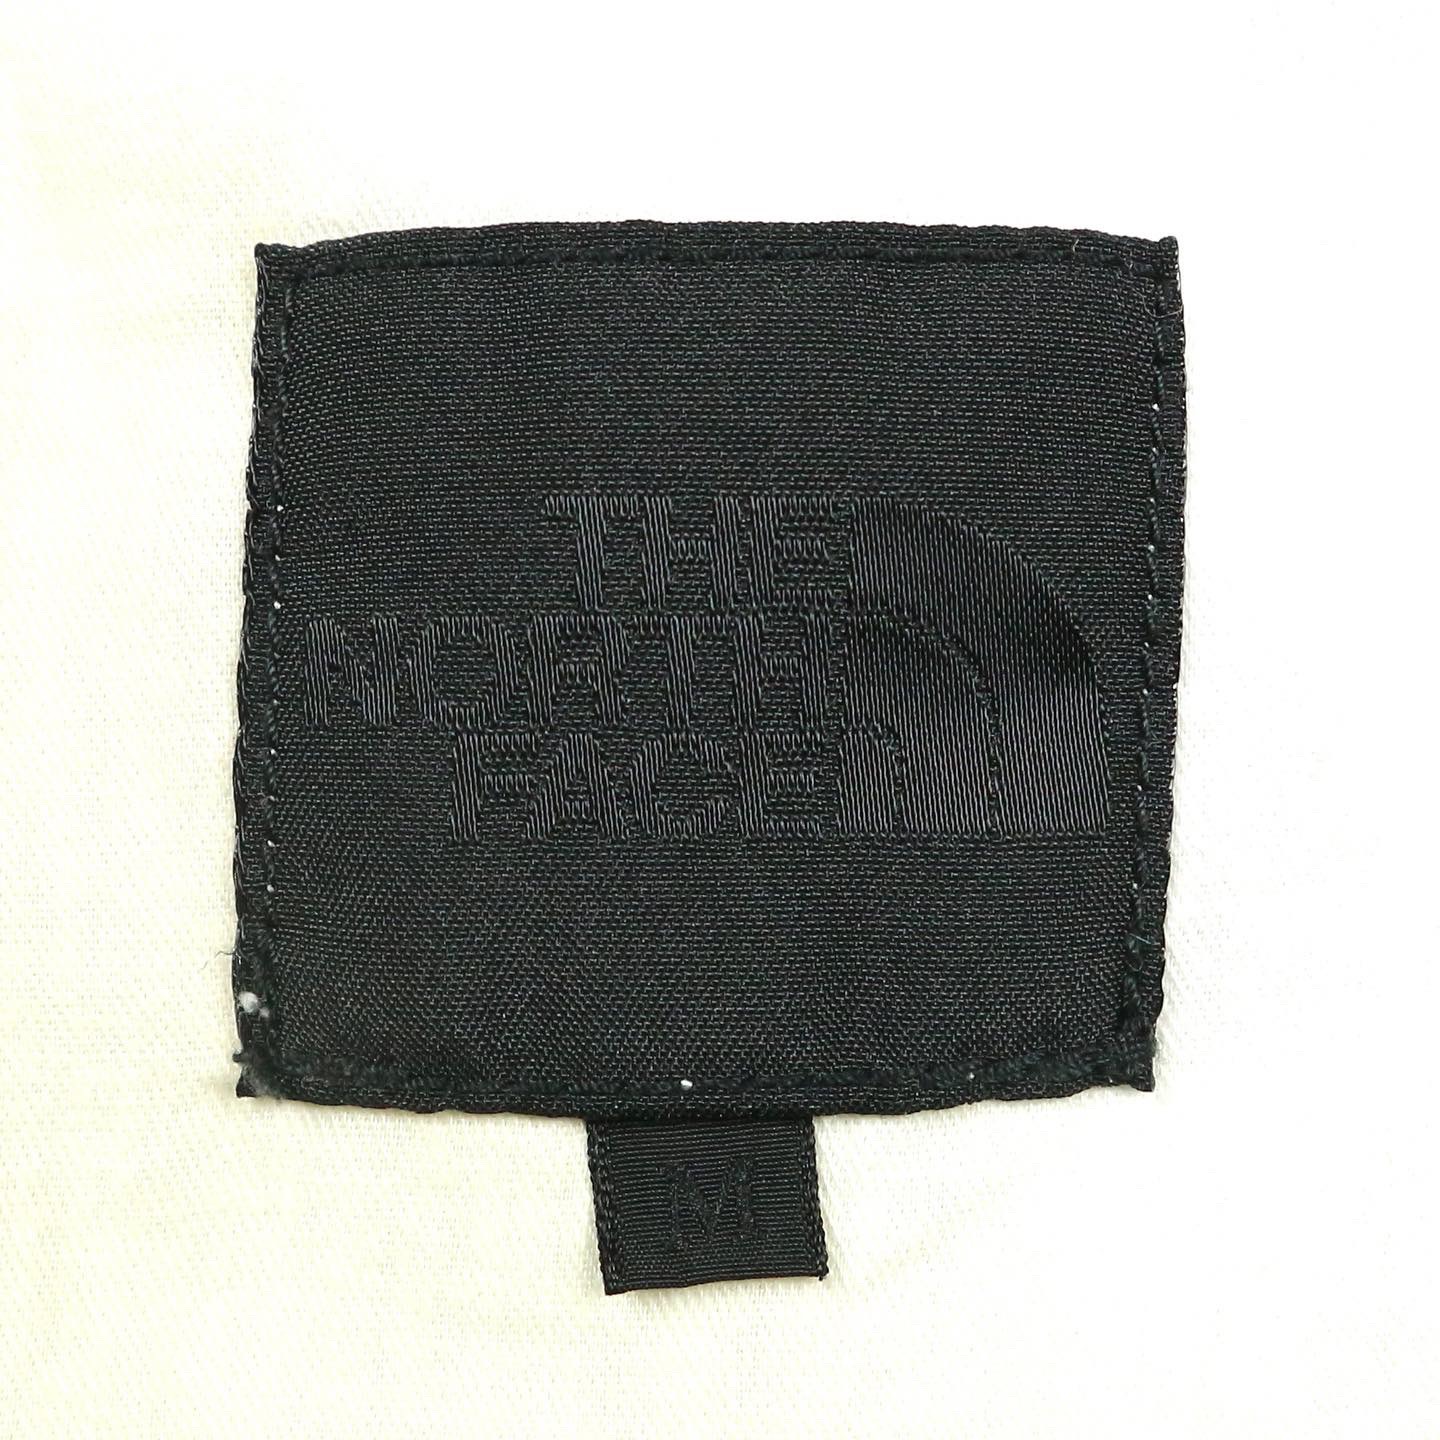 The North Face Shorts Size 30-31